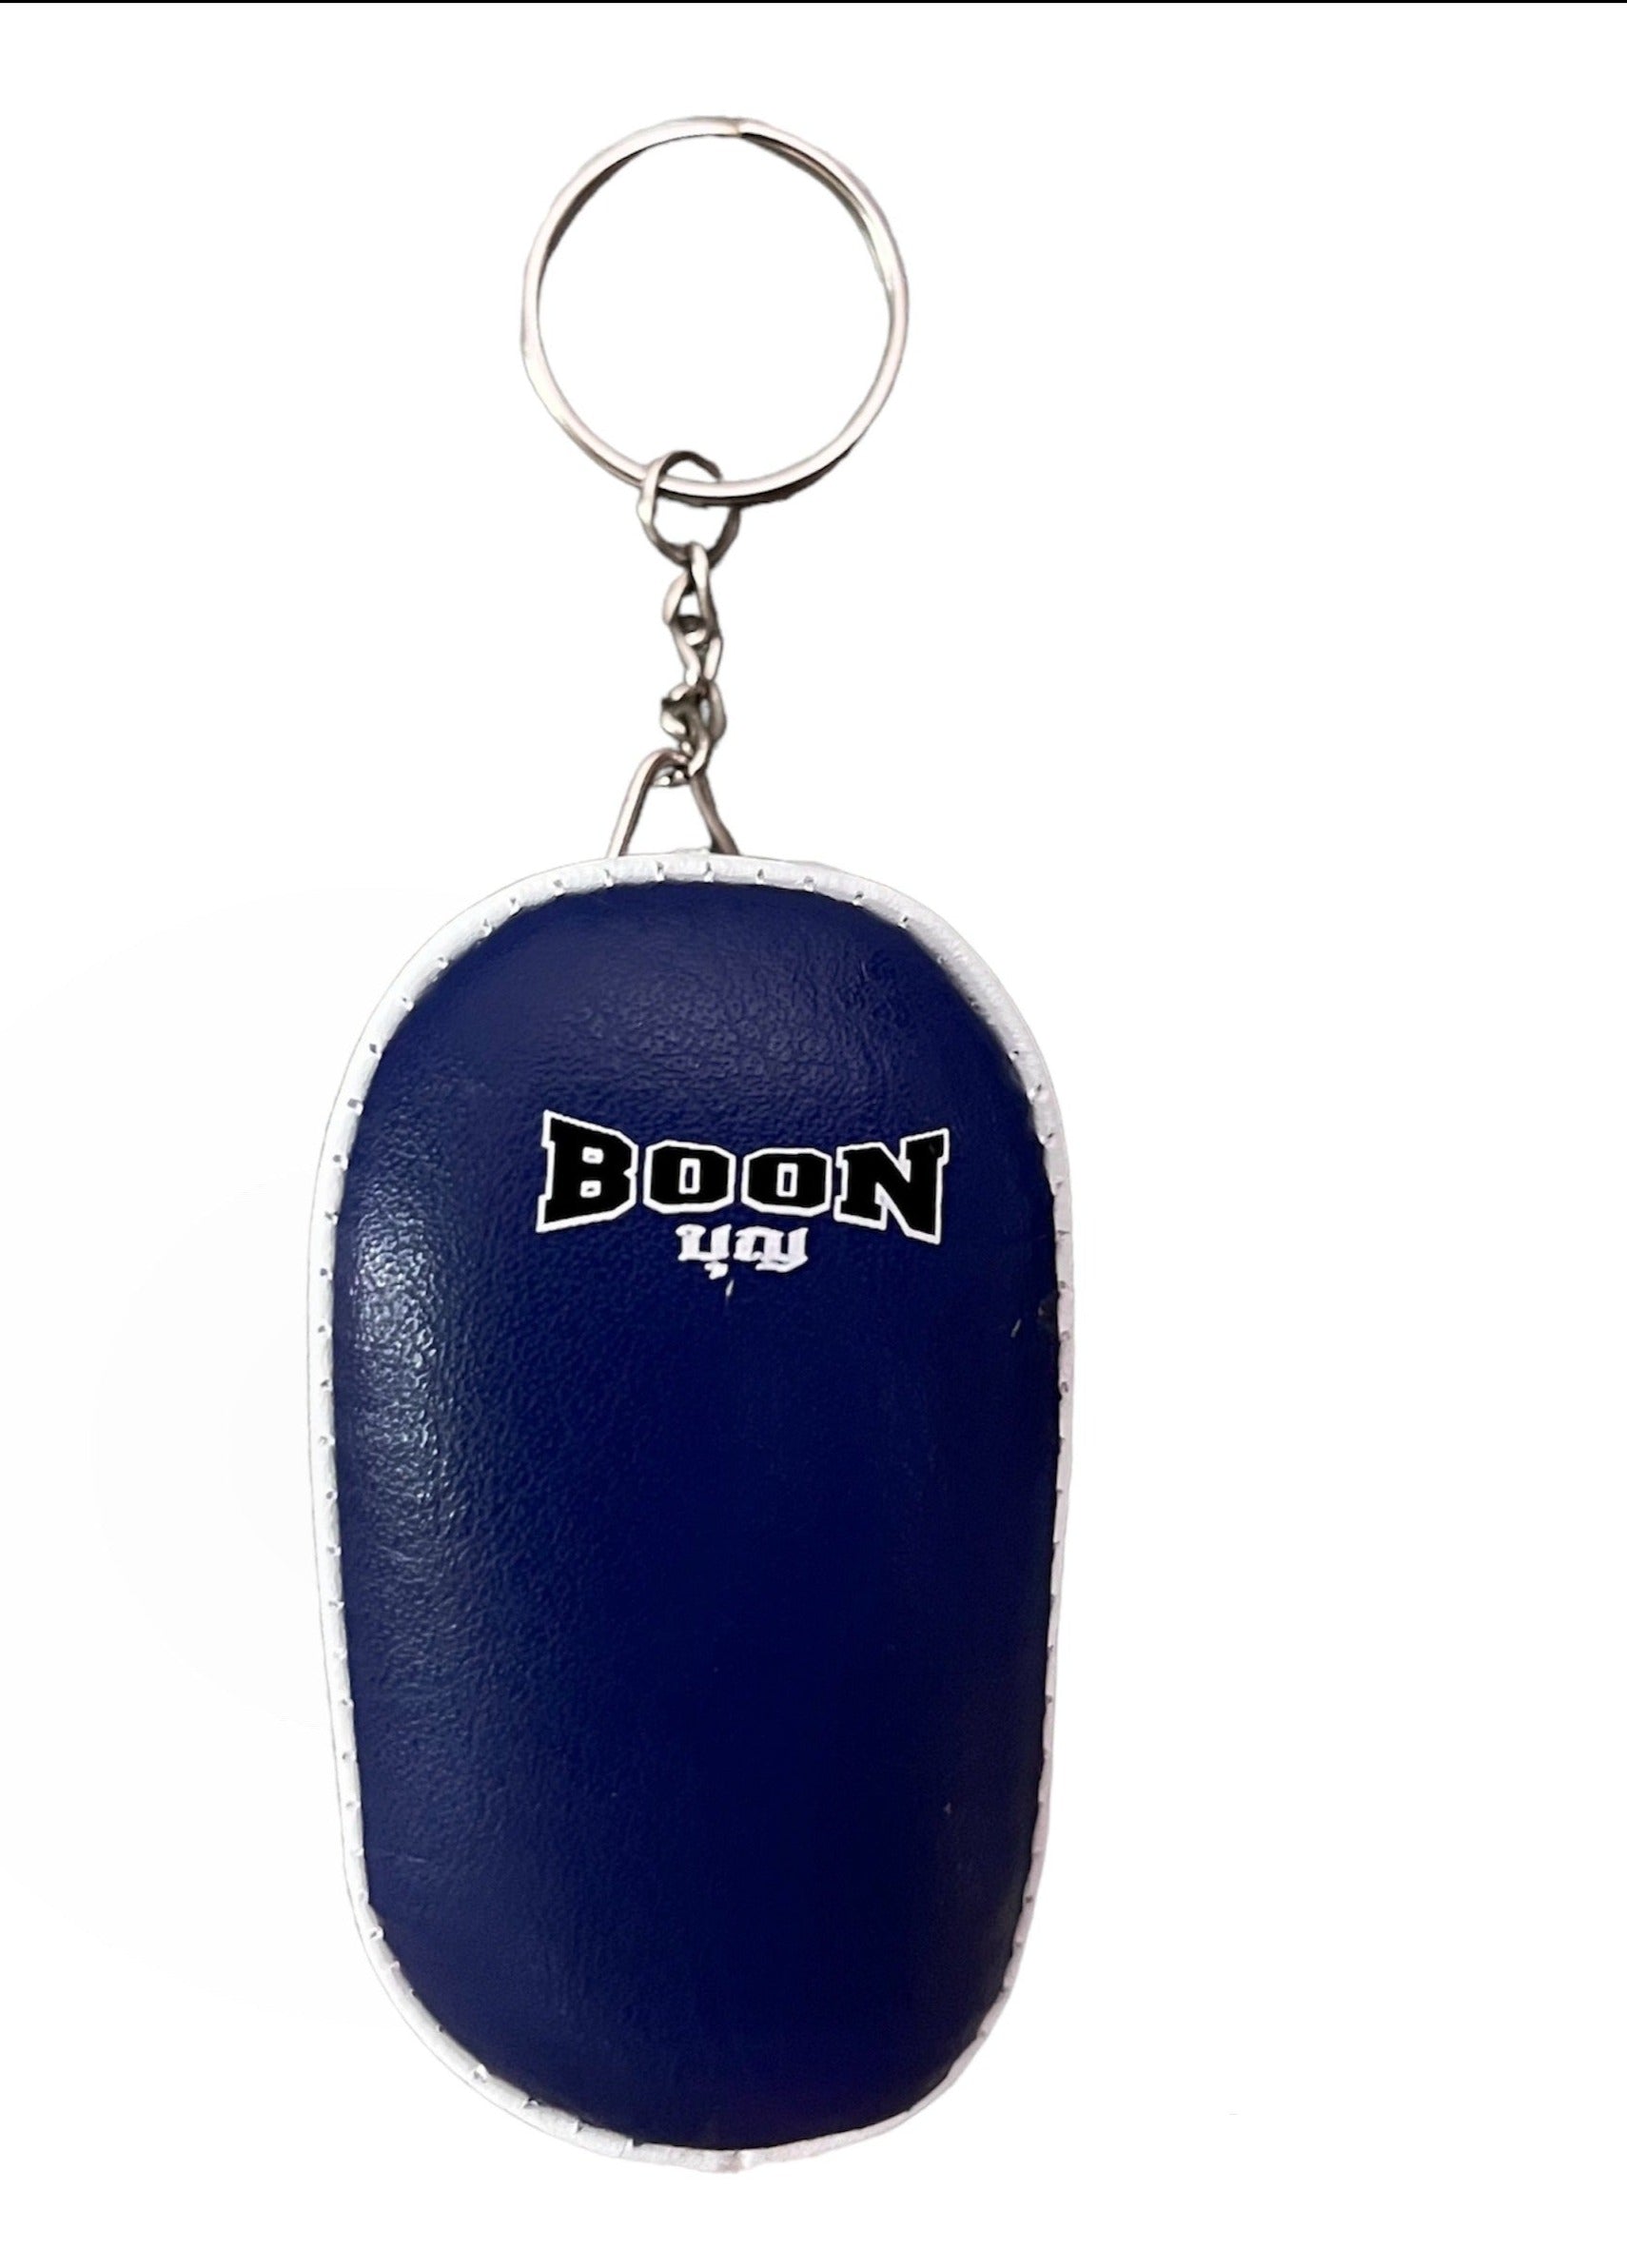 Boon Sport KRK Key Ring KickPad Red with White Trim